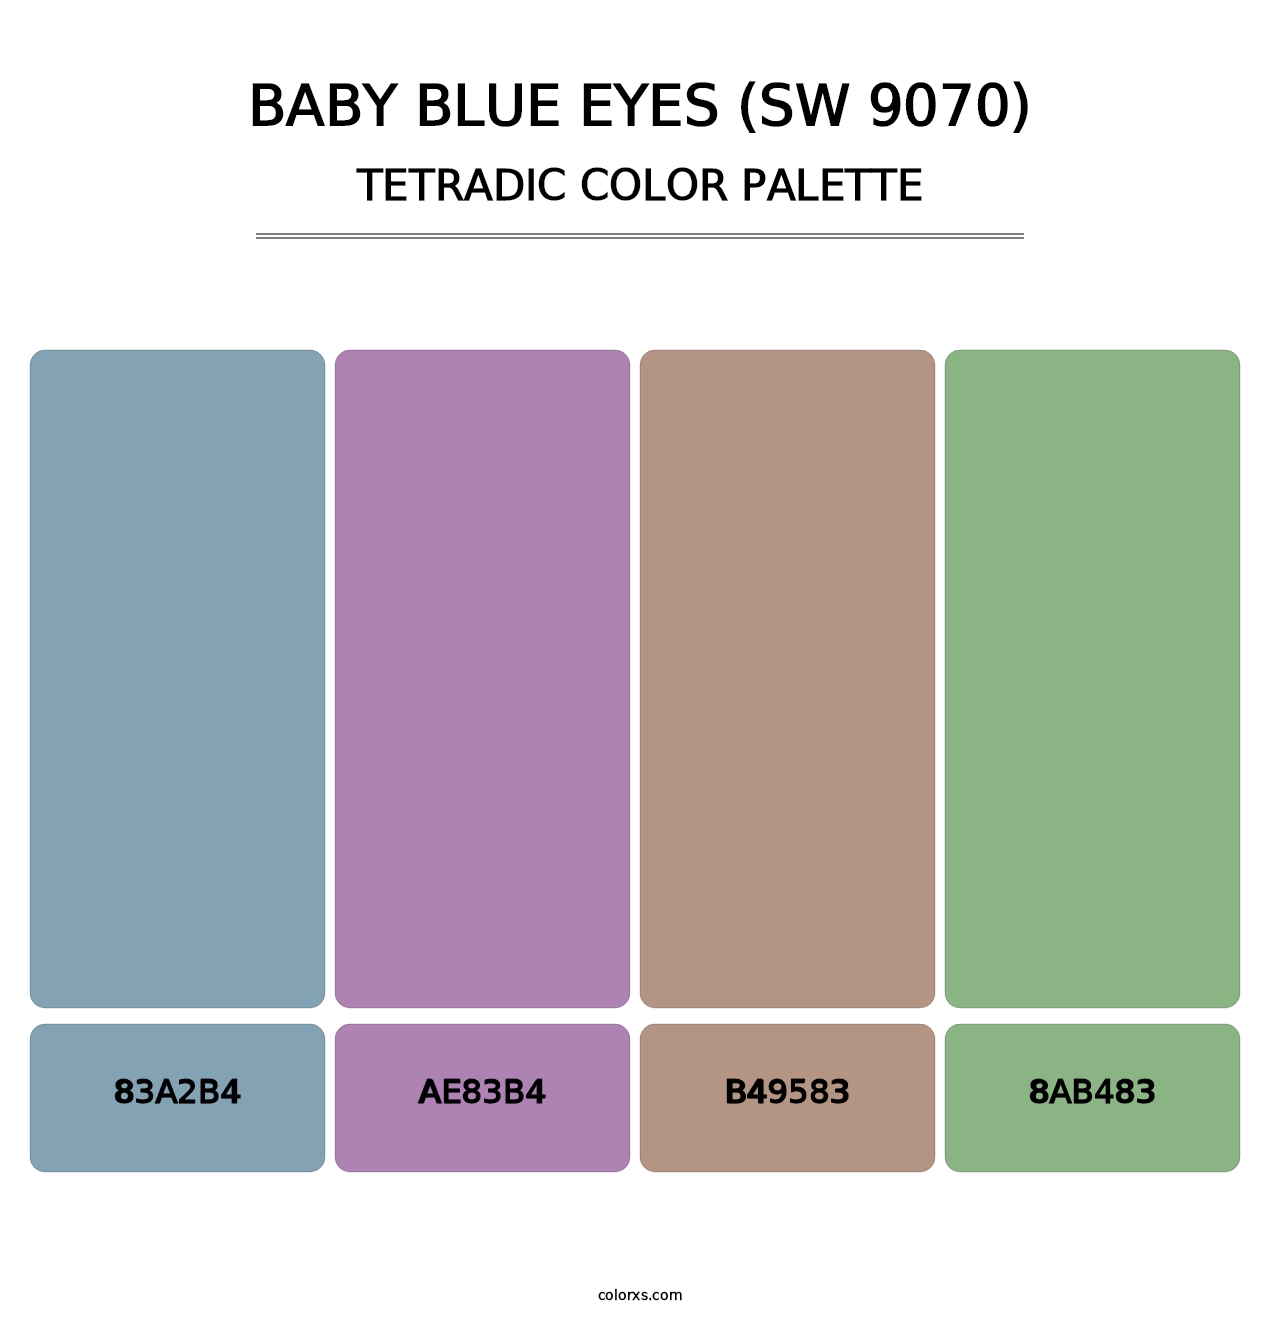 Baby Blue Eyes (SW 9070) - Tetradic Color Palette